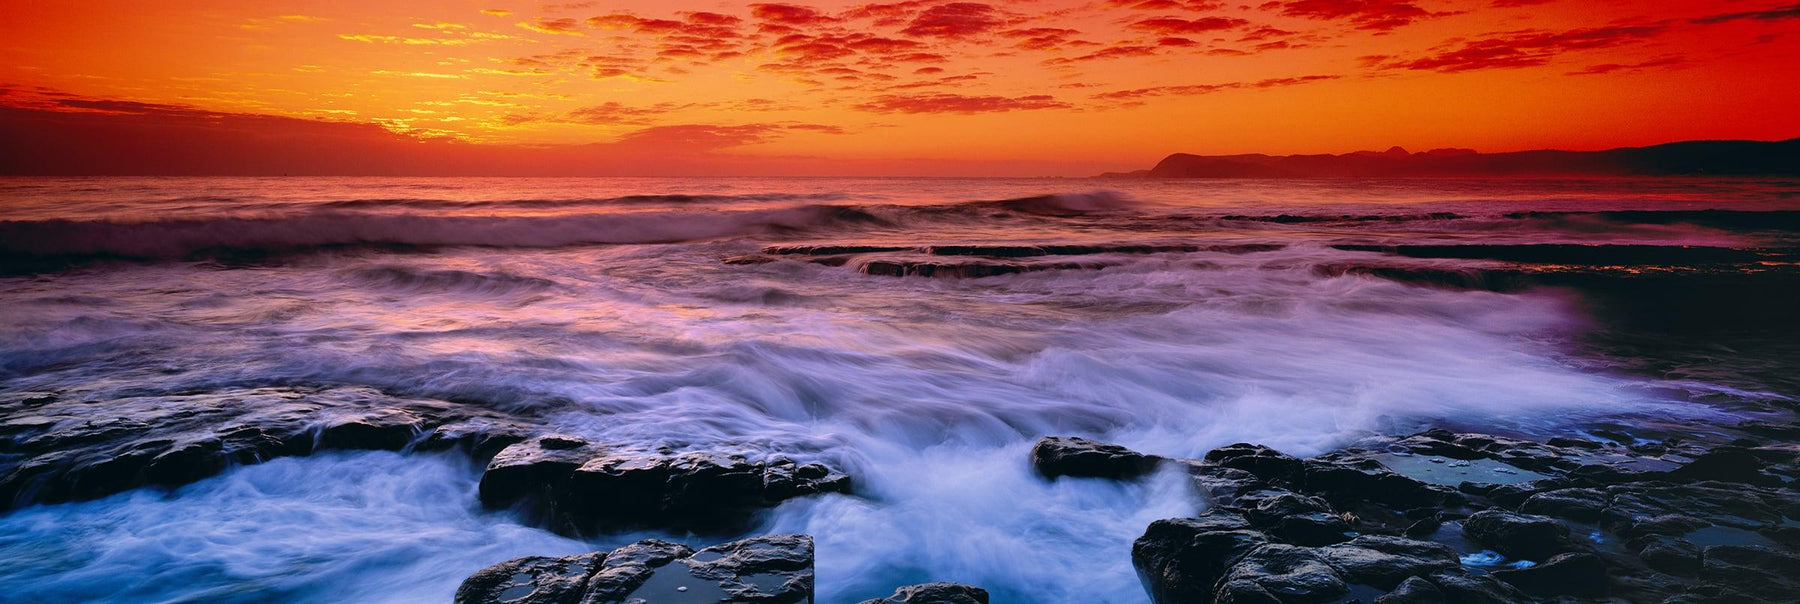 Waves crashing during sunrise off a rocky beach in Tasmania at sunset